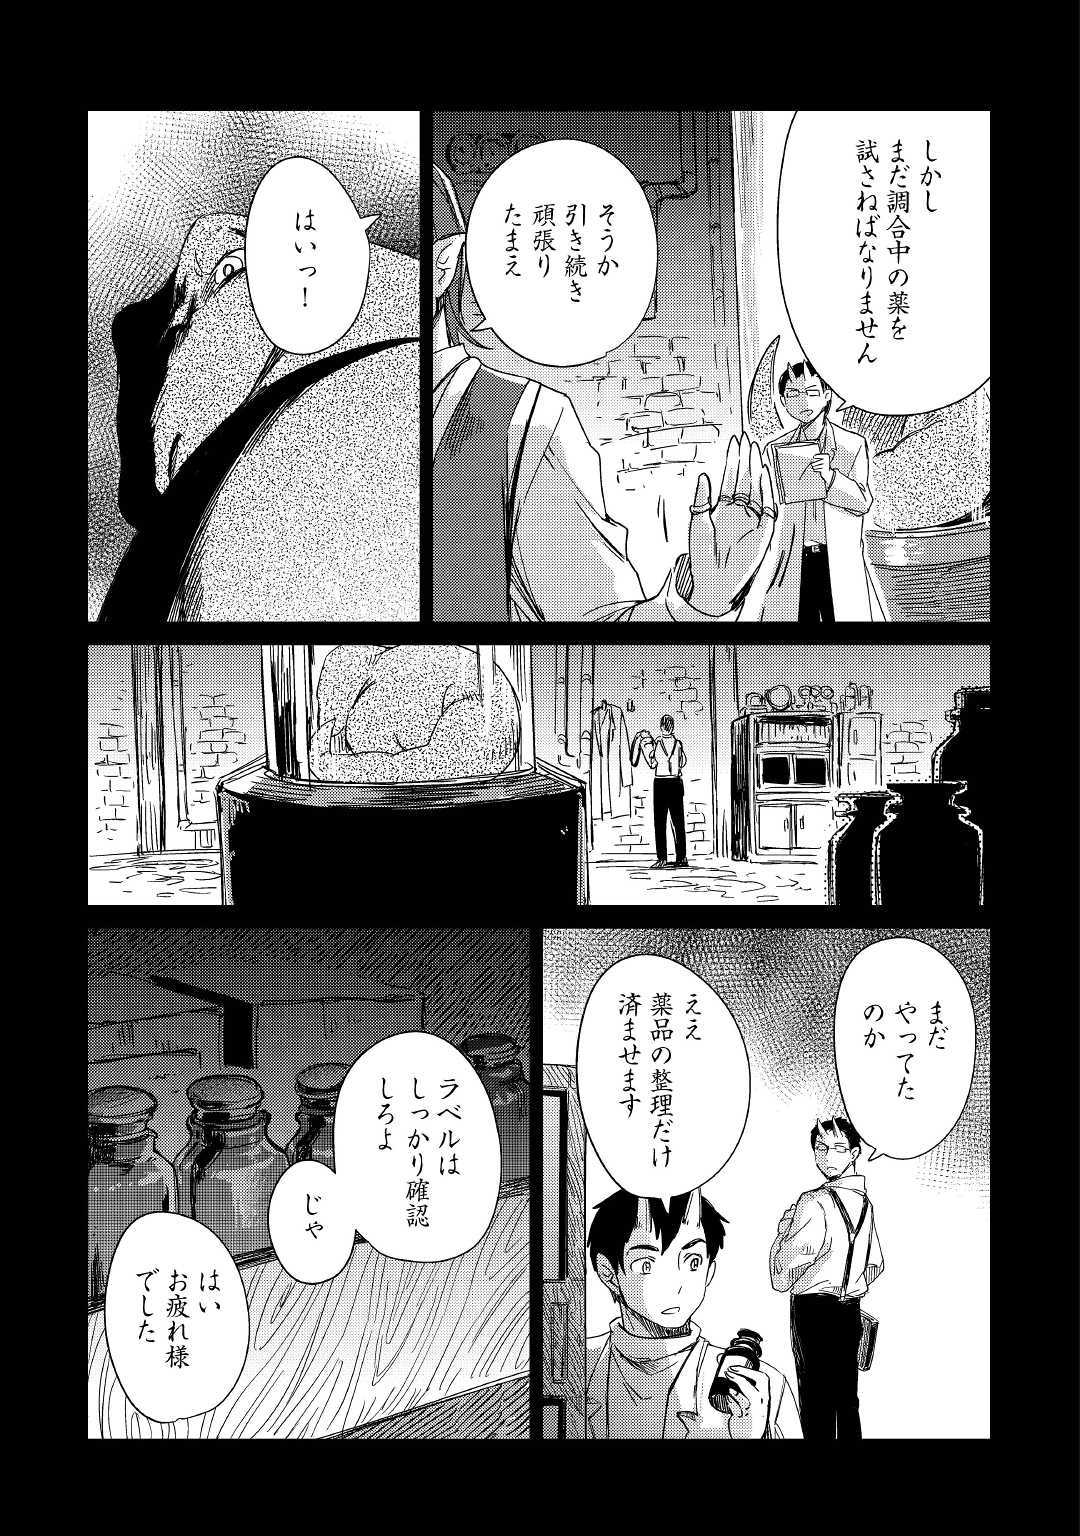 The Former Structural Researcher’s Story of Otherworldly Adventure 第16話 - Page 18